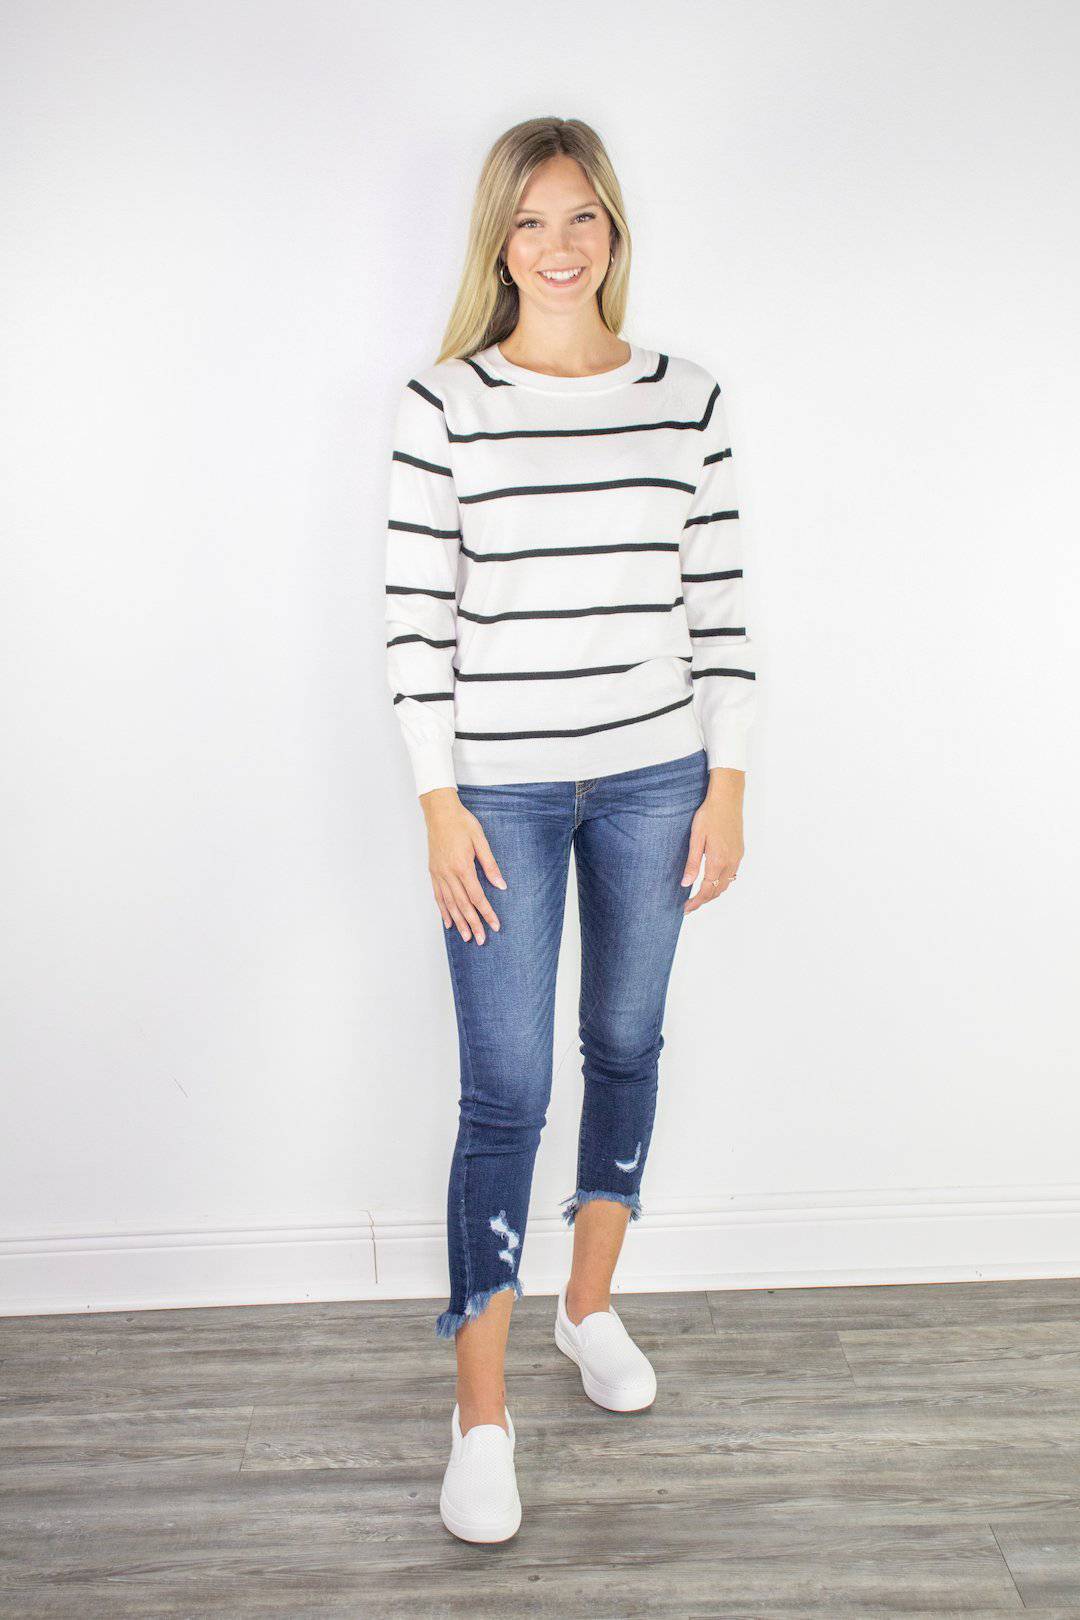 White and Black Stripe Sweater - Select Trends Boutique